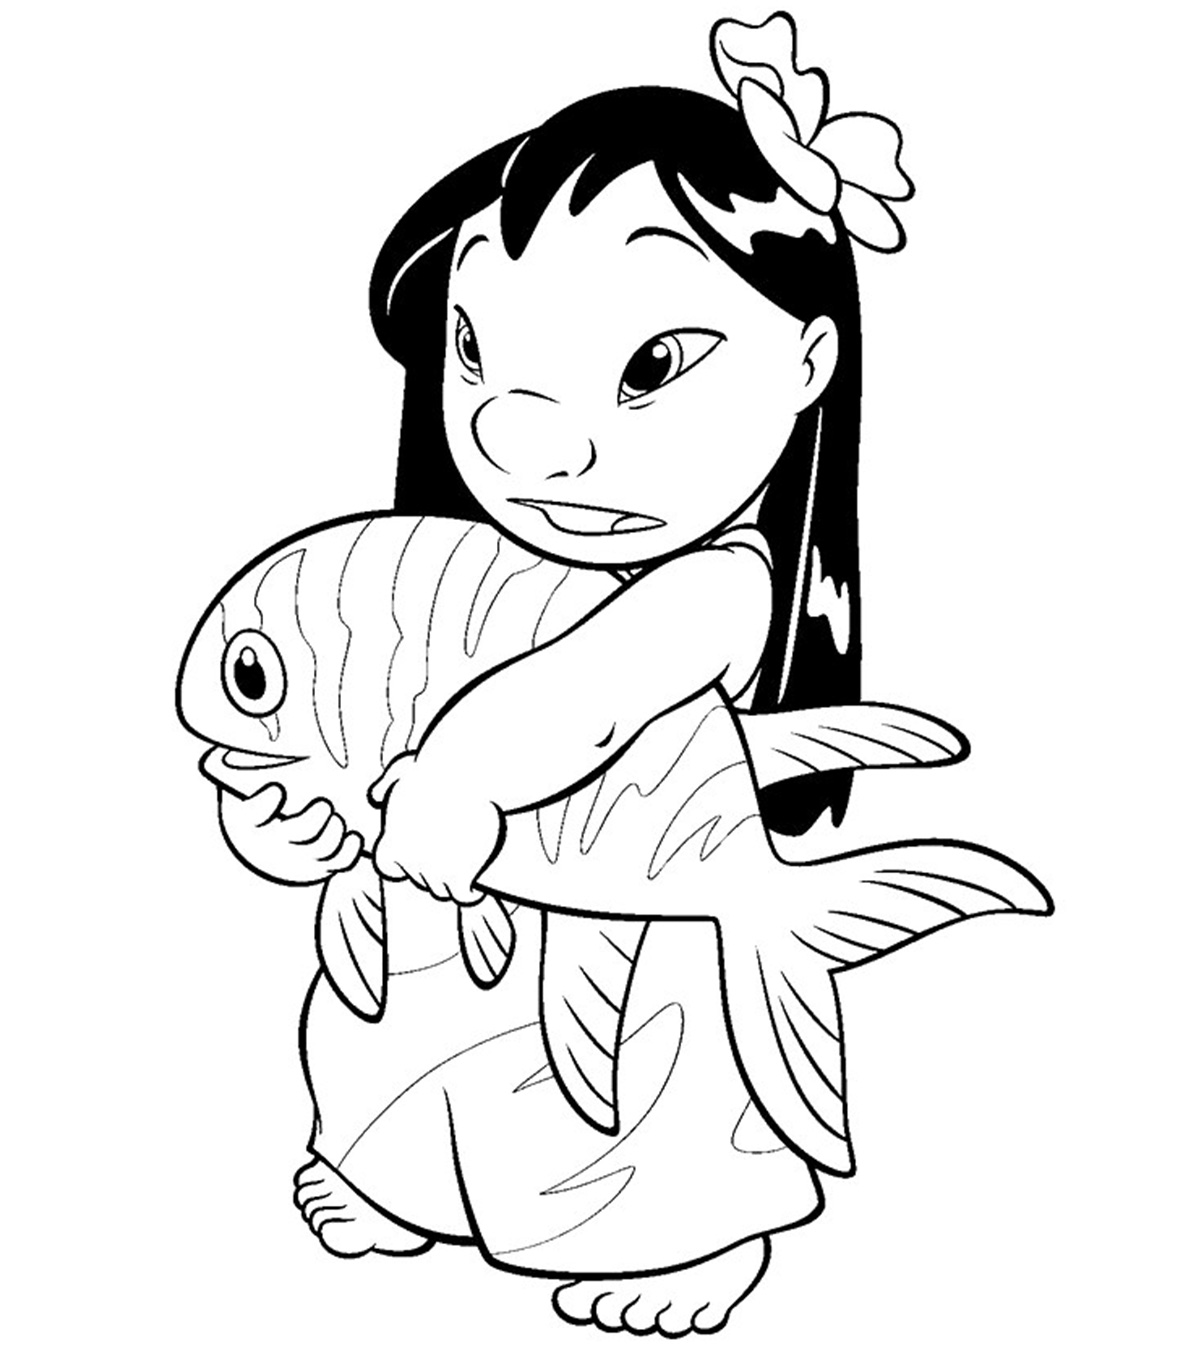 10 Cute ‘Lilo And Stitch’ Coloring Pages For Toddlers_image